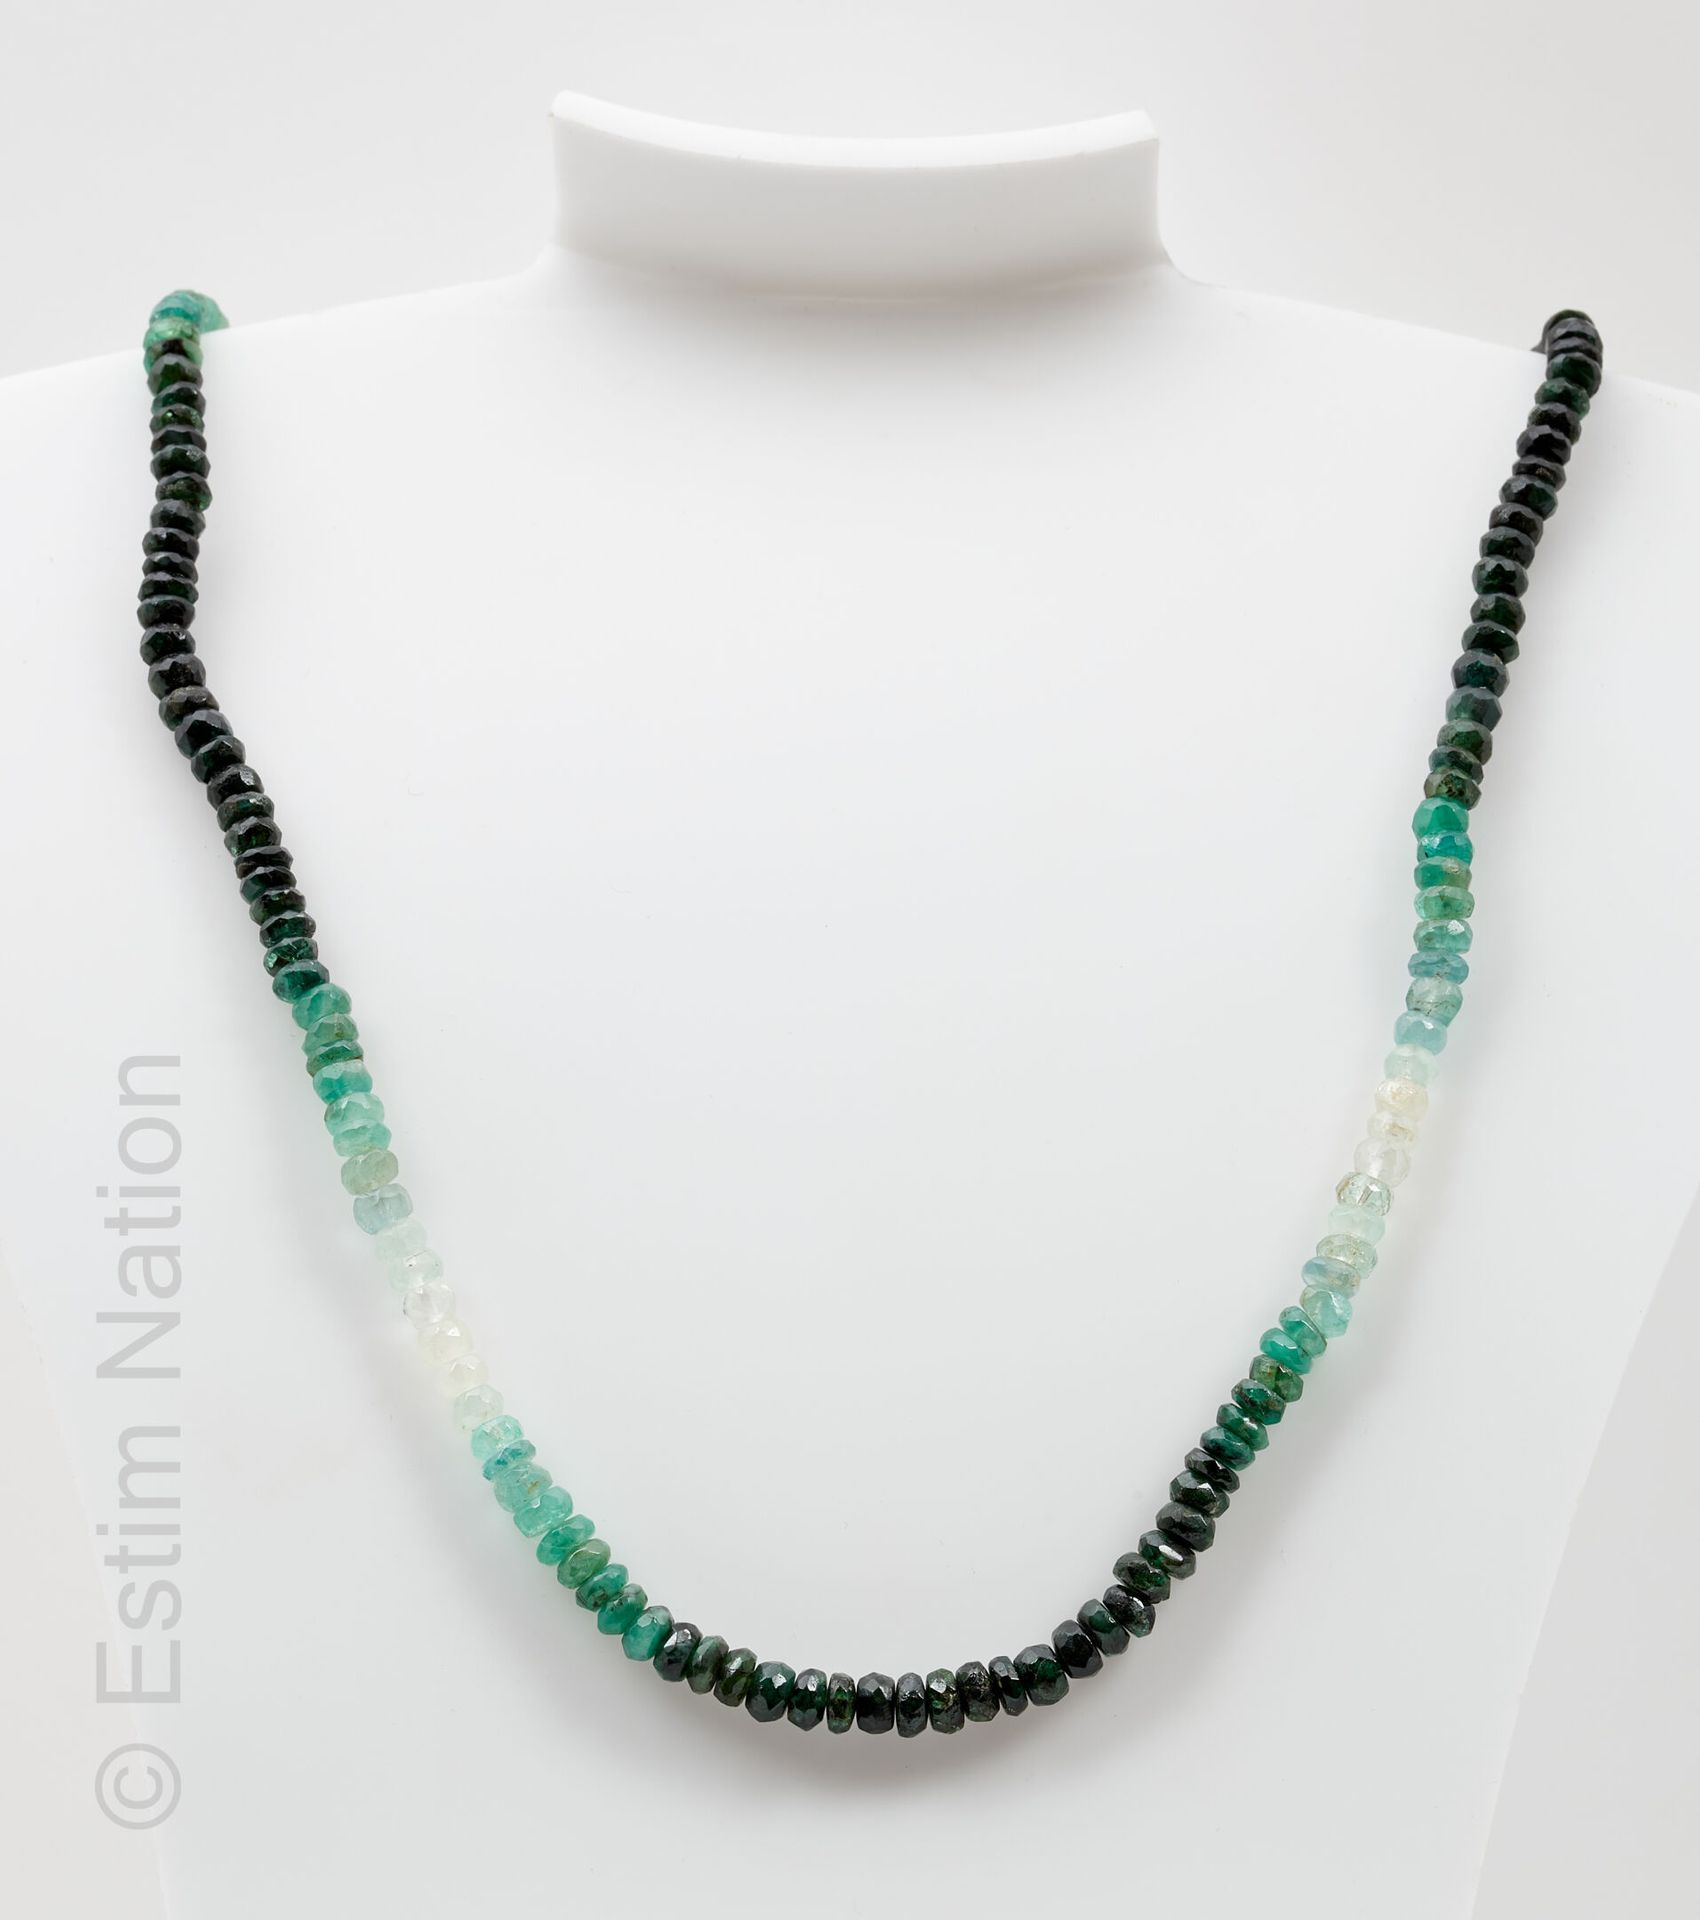 COLLIER ÉMERAUDES FACETTÉES Necklace made of faceted emerald beads in green grad&hellip;